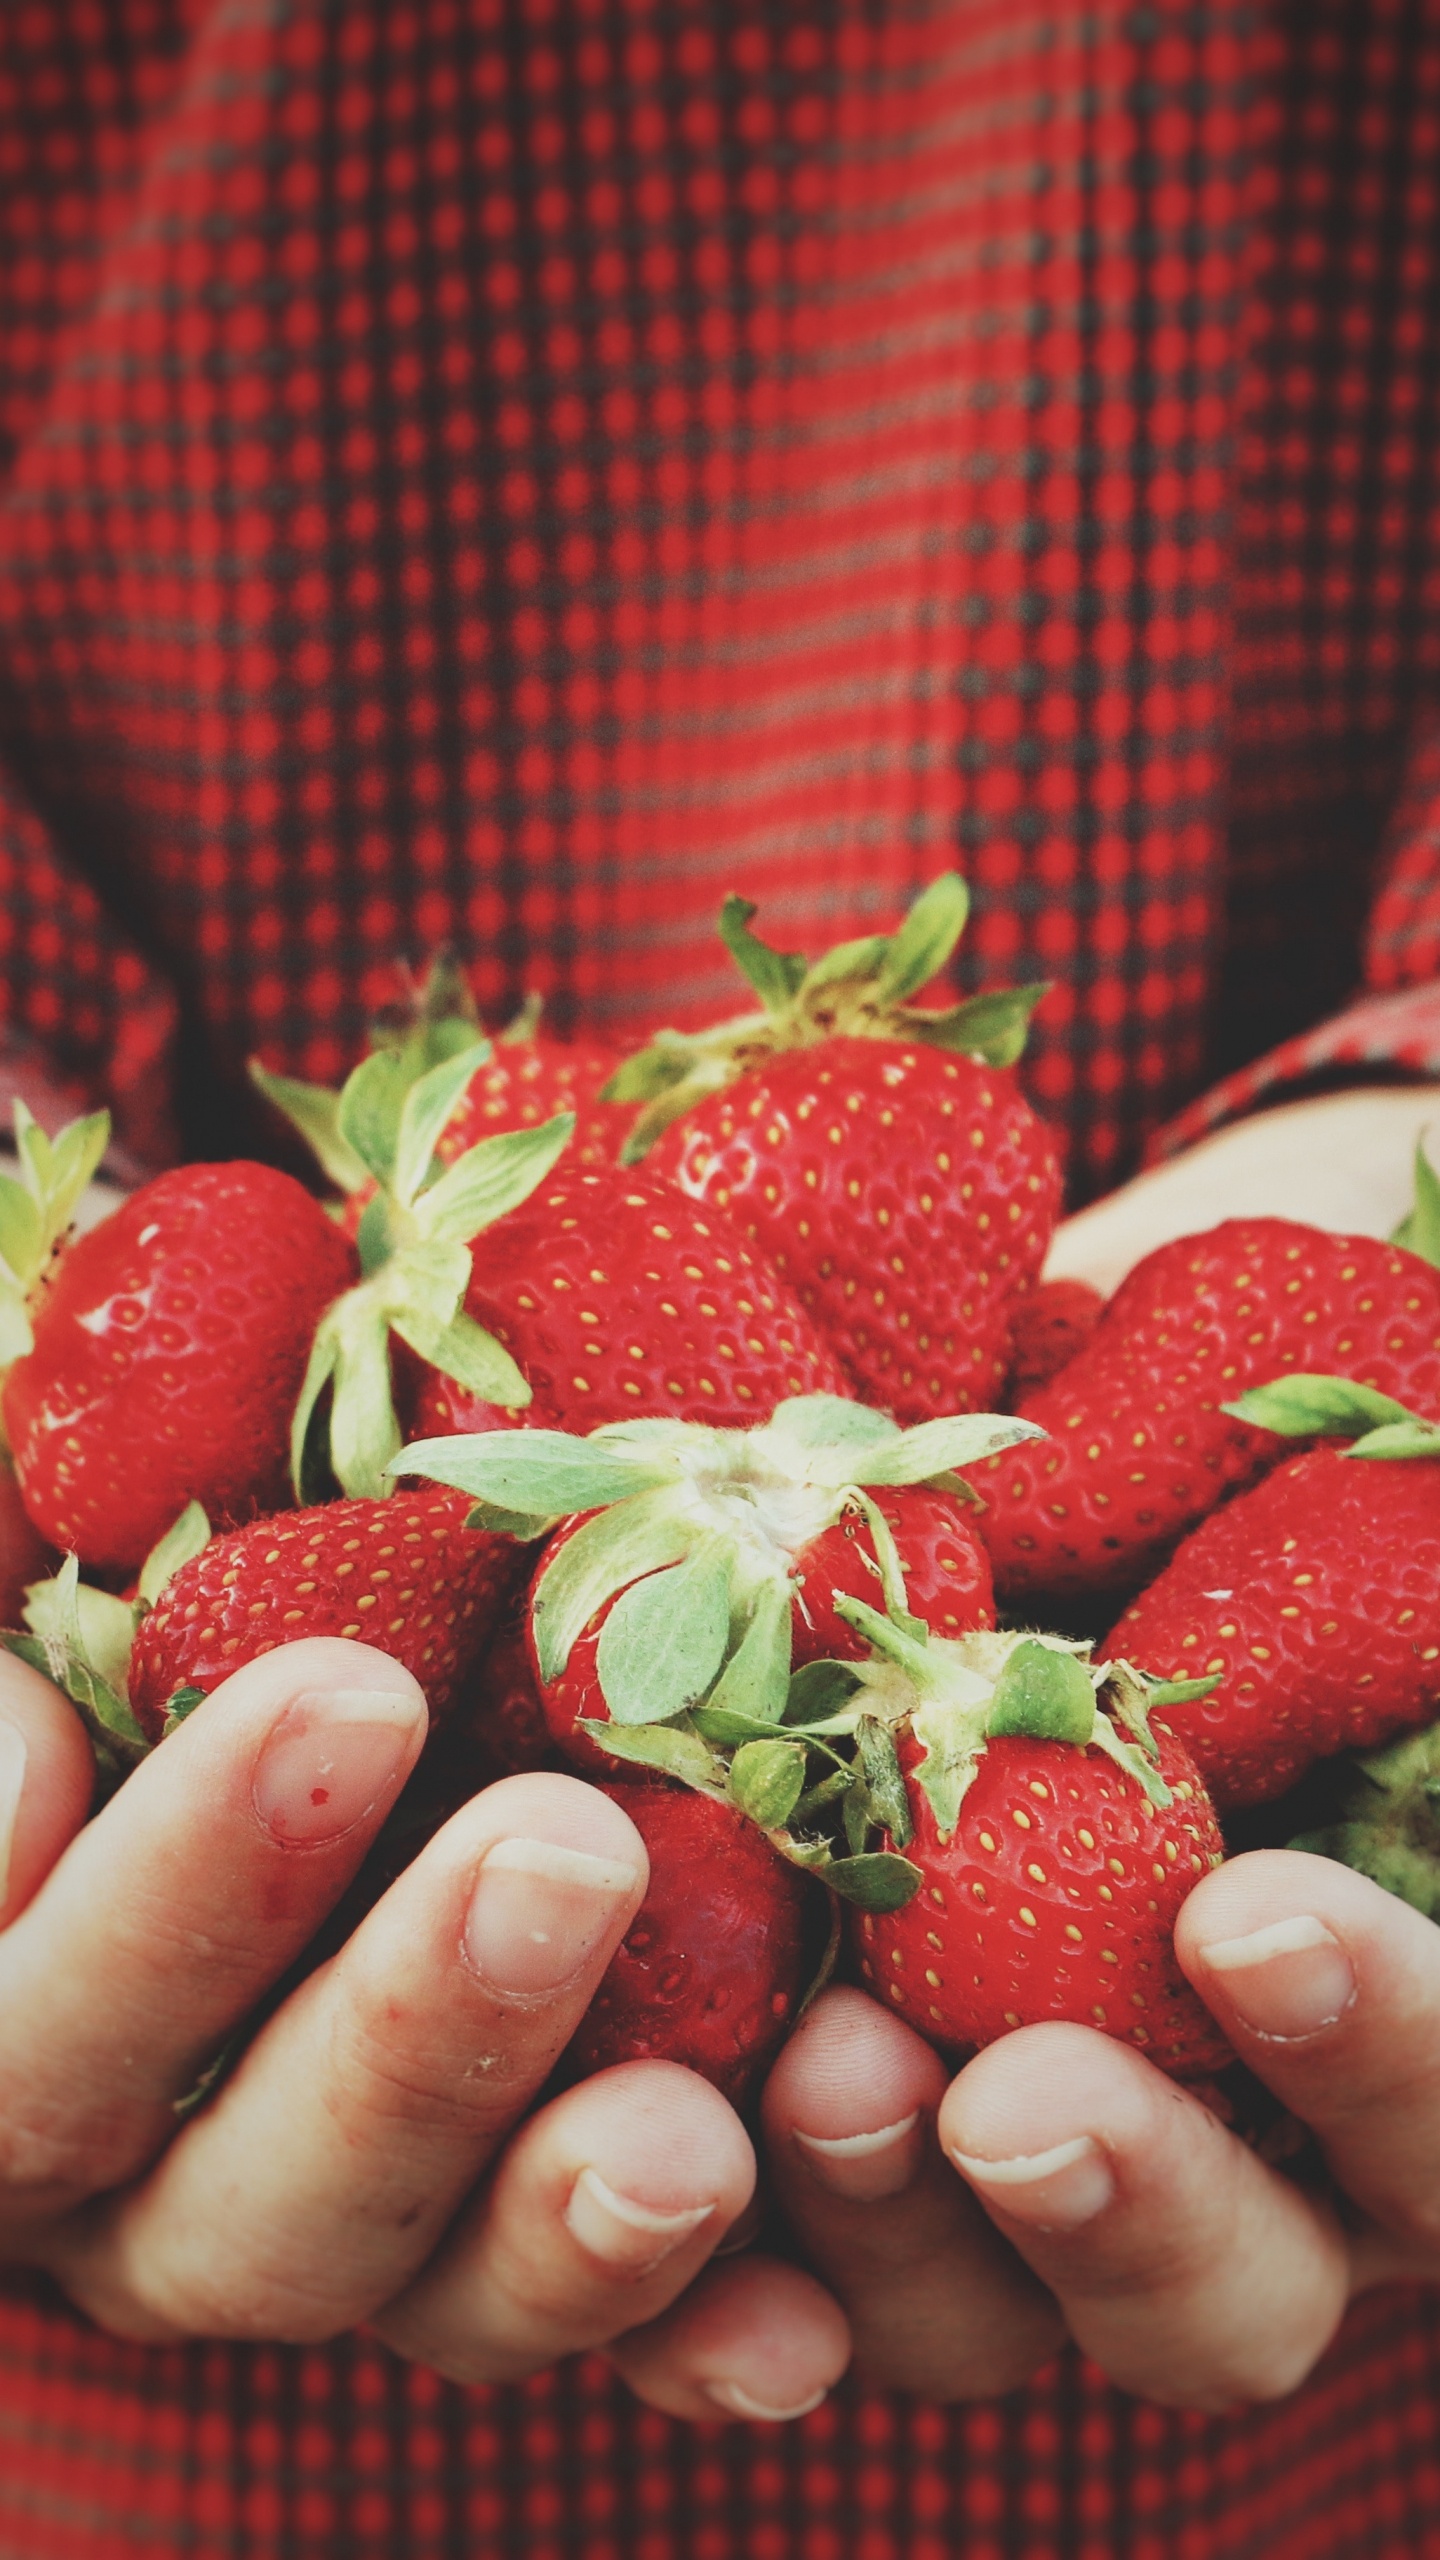 Person Holding Strawberries on Hand. Wallpaper in 1440x2560 Resolution